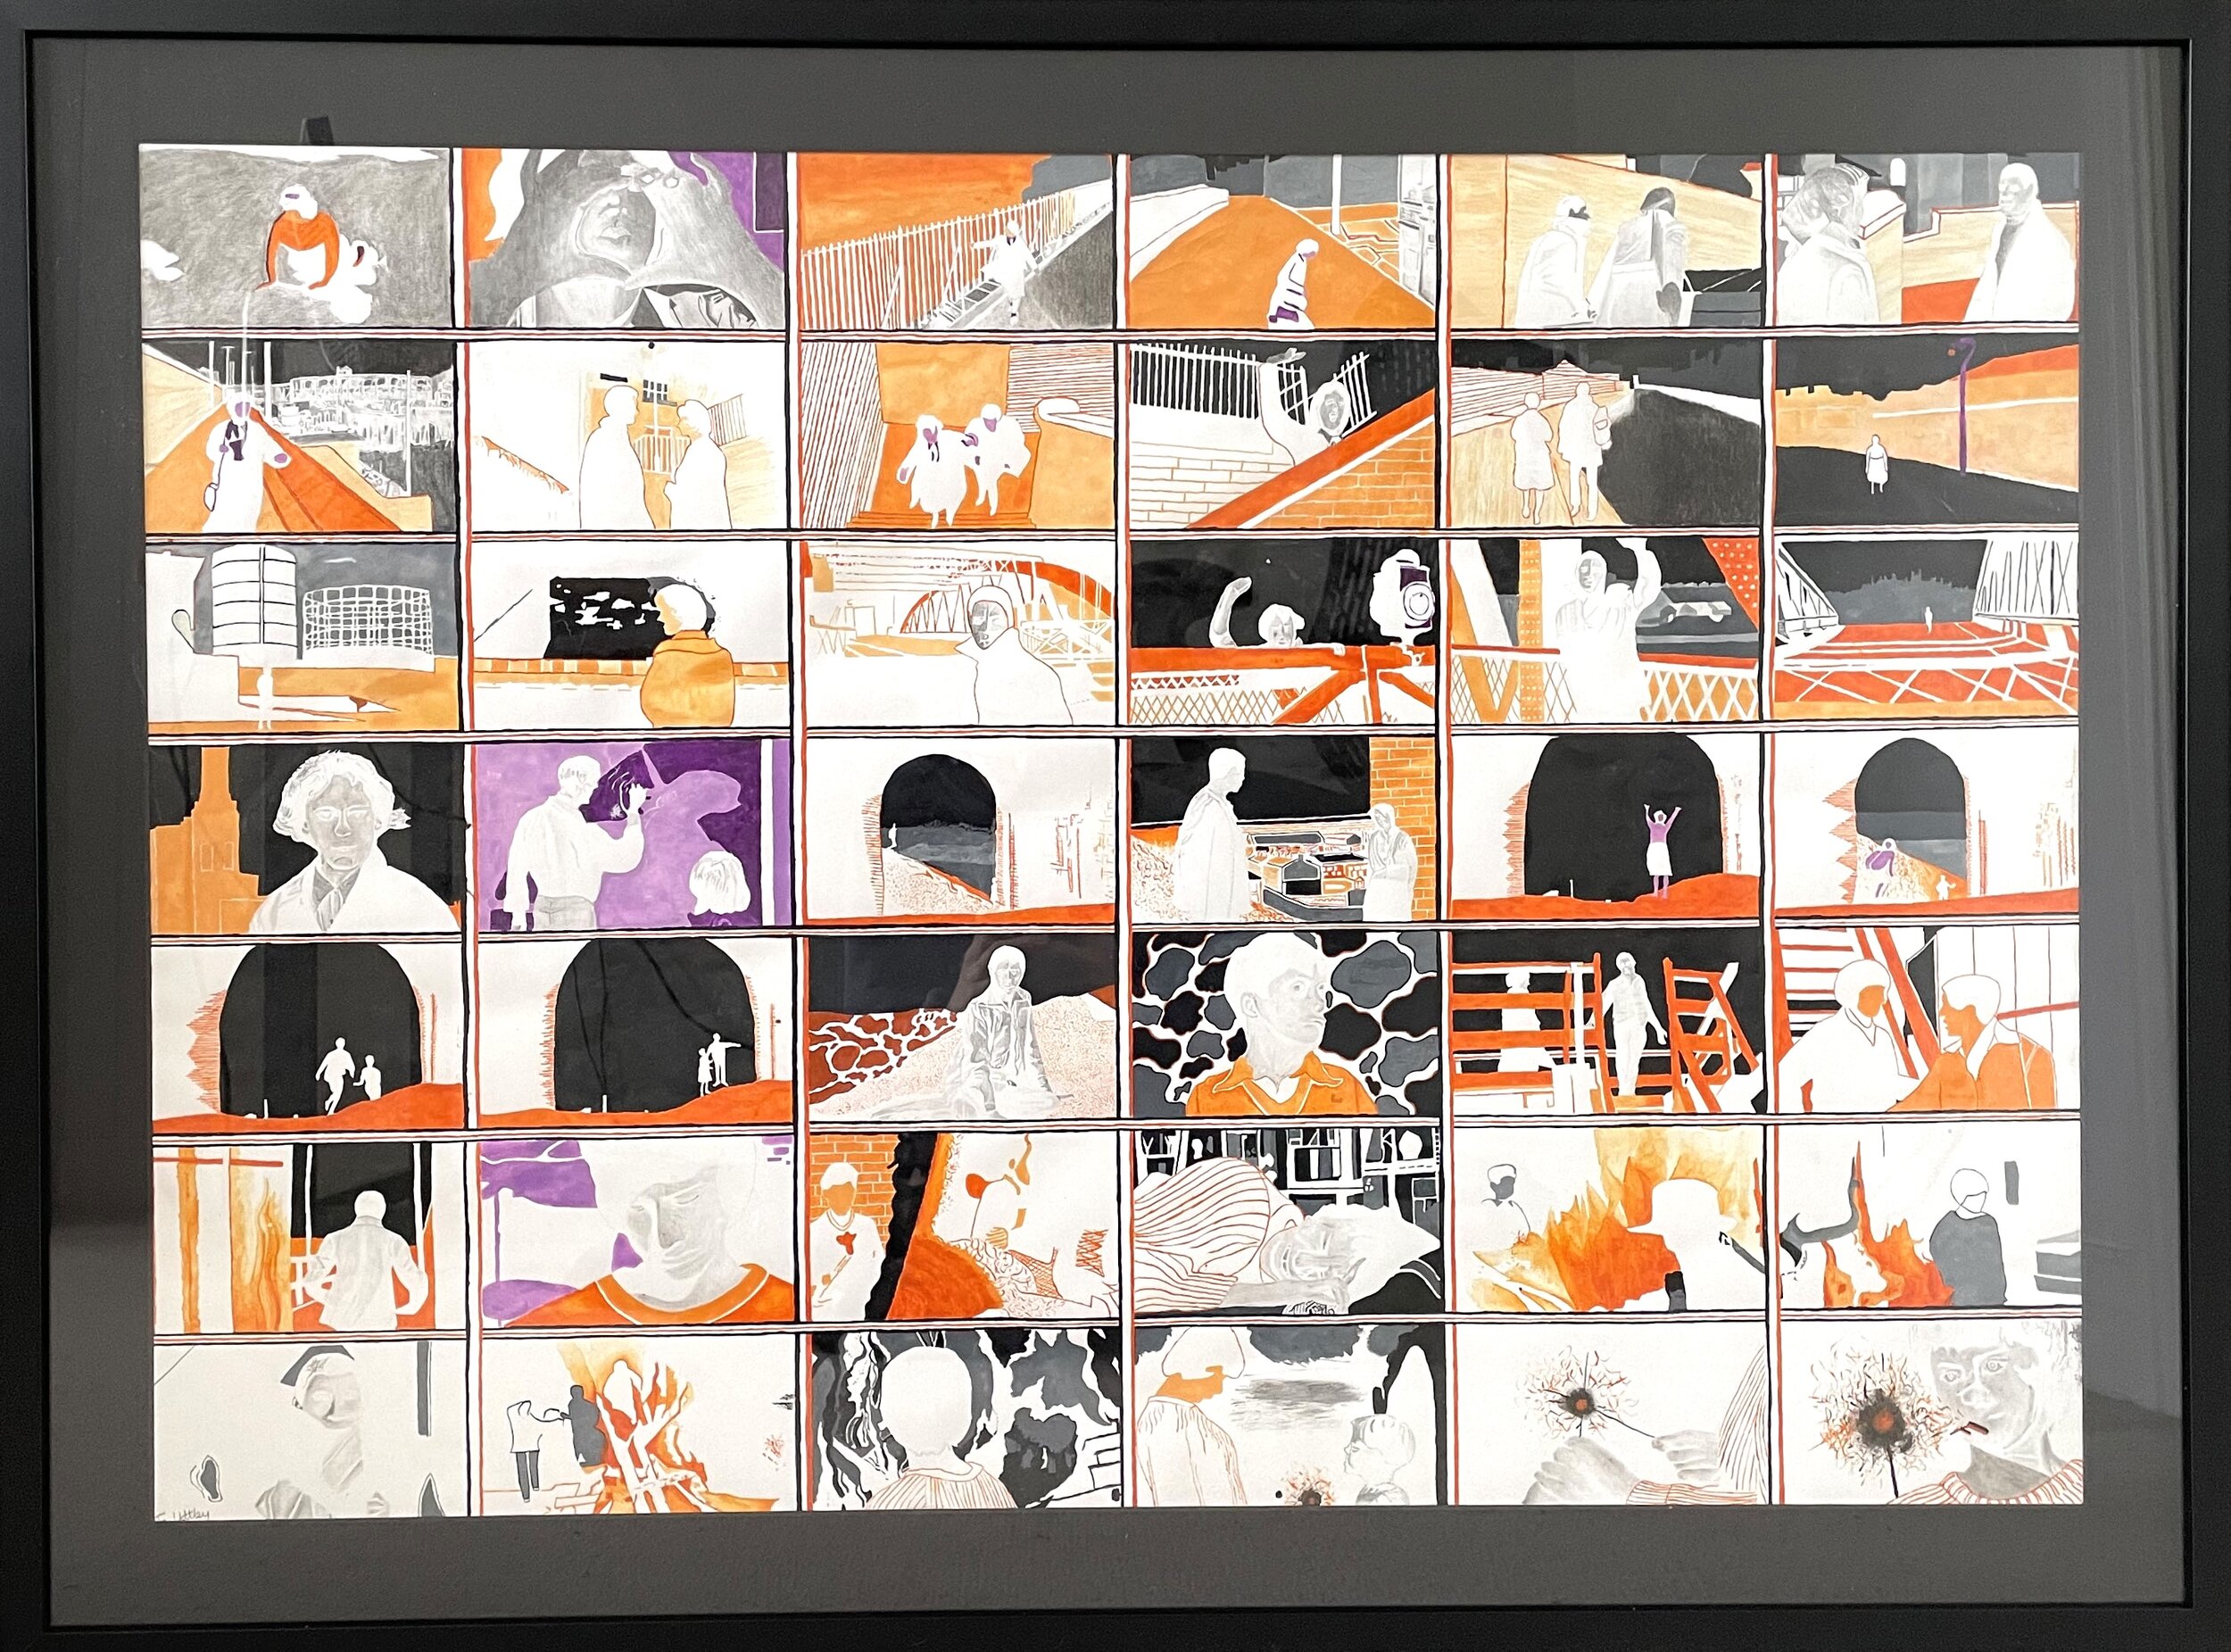 A series of 42 35mm paintings in seven rows of 6 replicating the style of a roll of film. They are painted versions of stills from the film A Taste of Honey in chronological order with an orange, black and purple colour scheme.